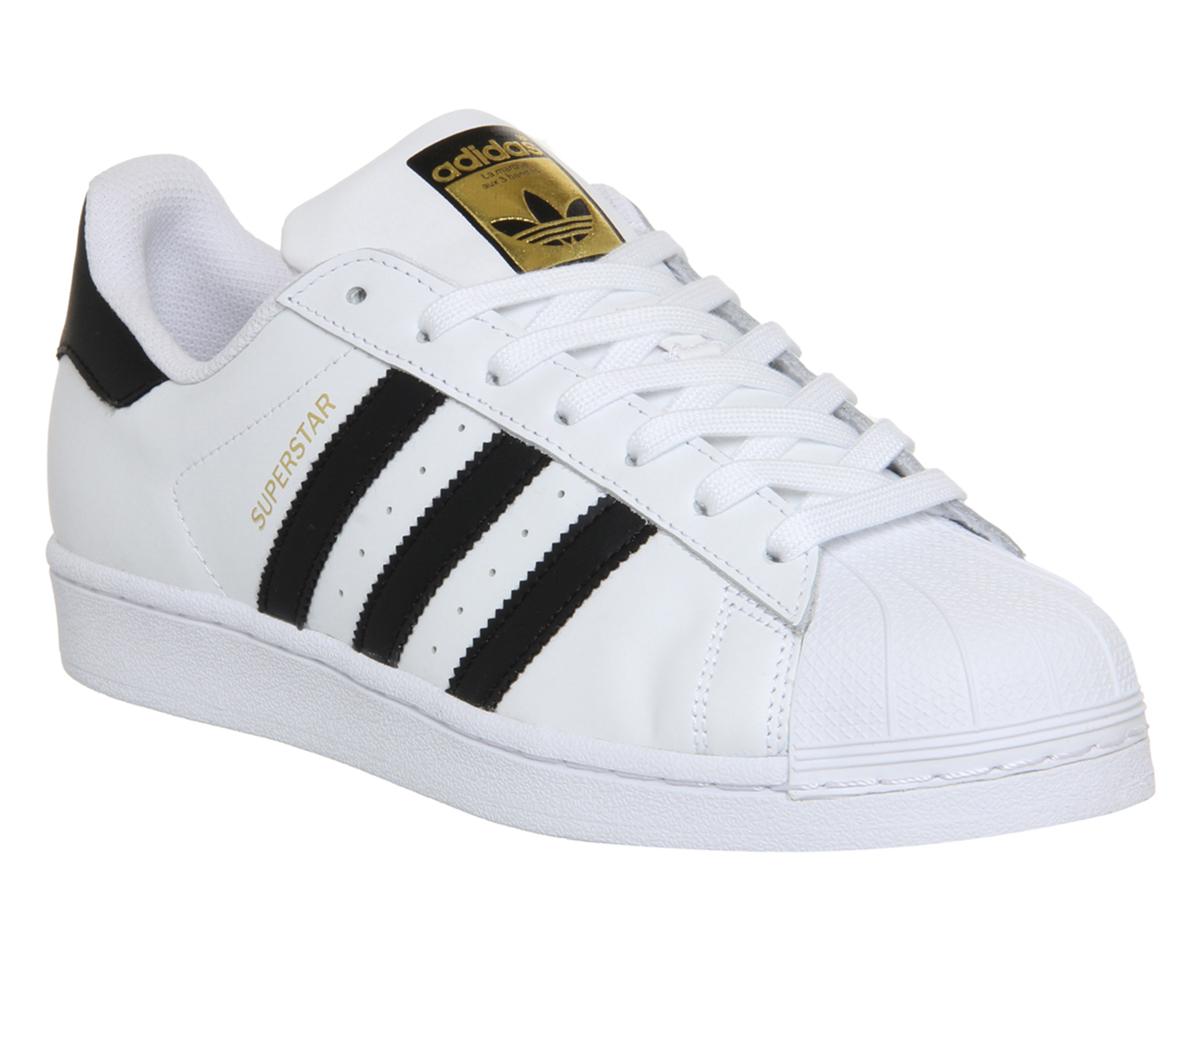 adidas Superstar 1 White Black Foundation - His trainers